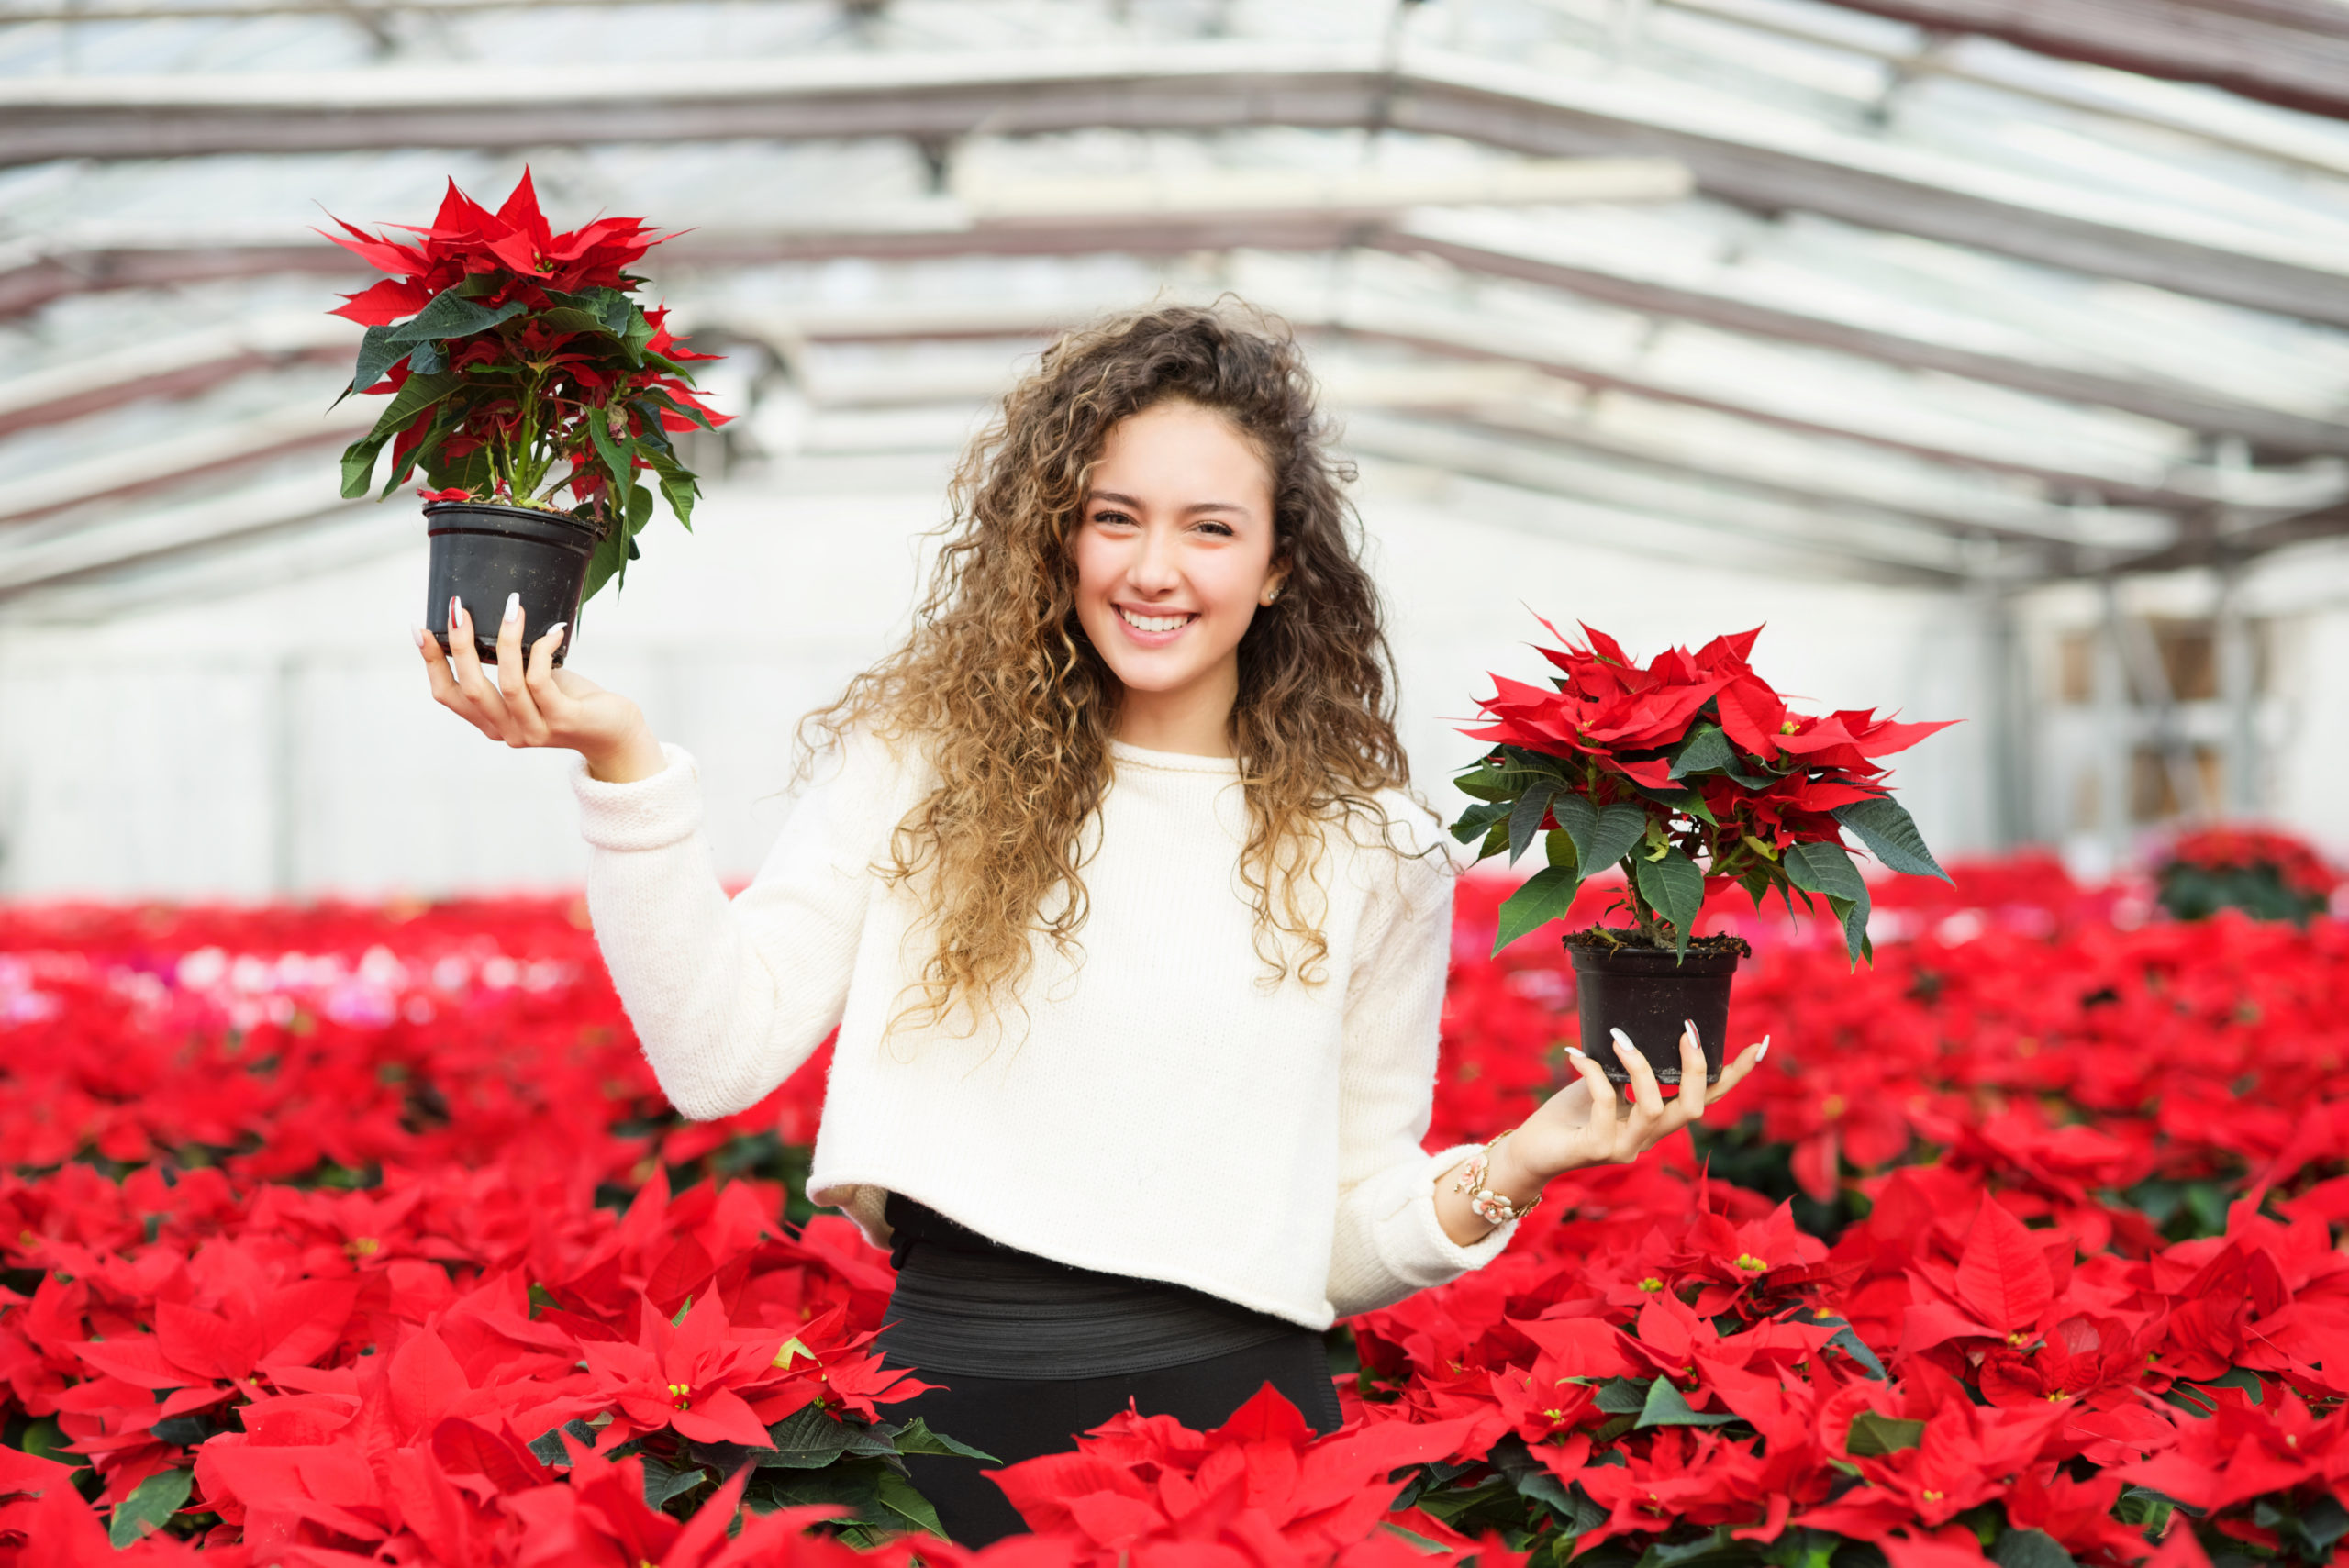 How To Care For Poinsettias At Home